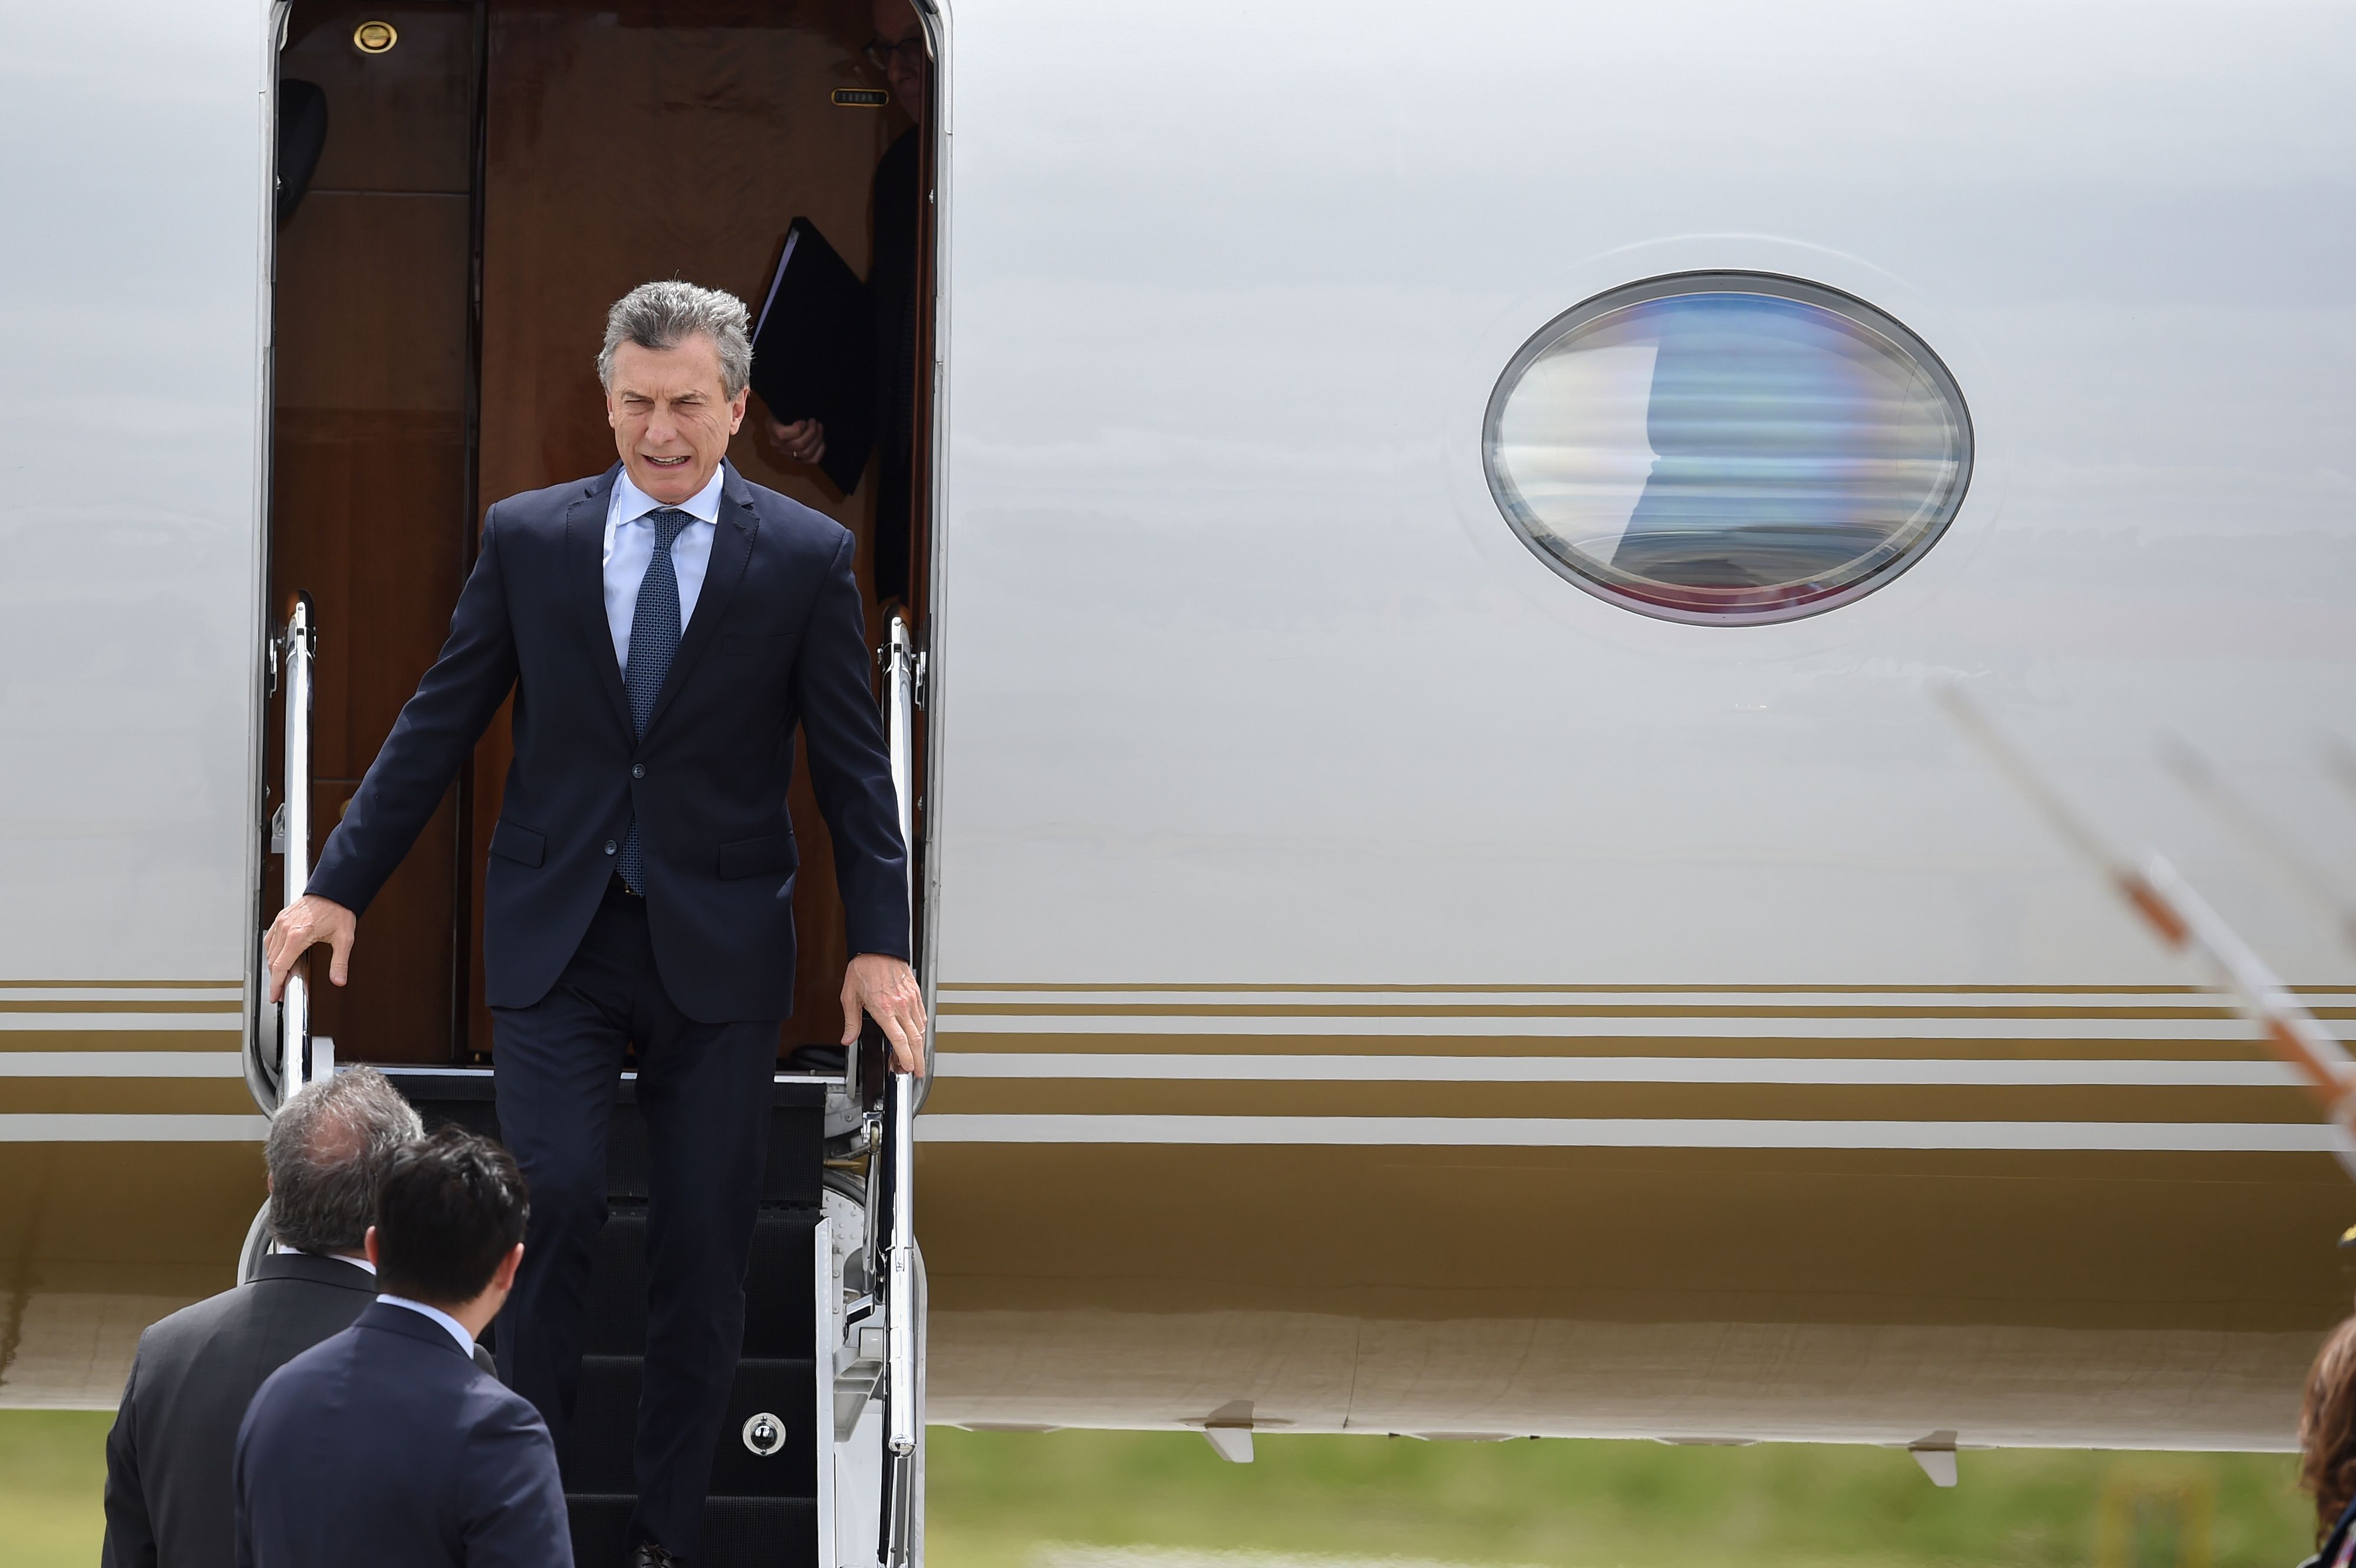 Argentine President Mauricio Macri arrives on August 7, 2018 at the CATAM military airport in Bogota, where he will attend Colombia's President Ivan Duque swearing-in ceremony. - Duque has his work cut out for him as he takes office Tuesday amid heightened tensions with neighbouring Venezuela and the lingering difficulties of peace-building with the nation's rebel groups. (Photo by Diana SANCHEZ / AFP) (Photo credit should read DIANA SANCHEZ/AFP/Getty Images)